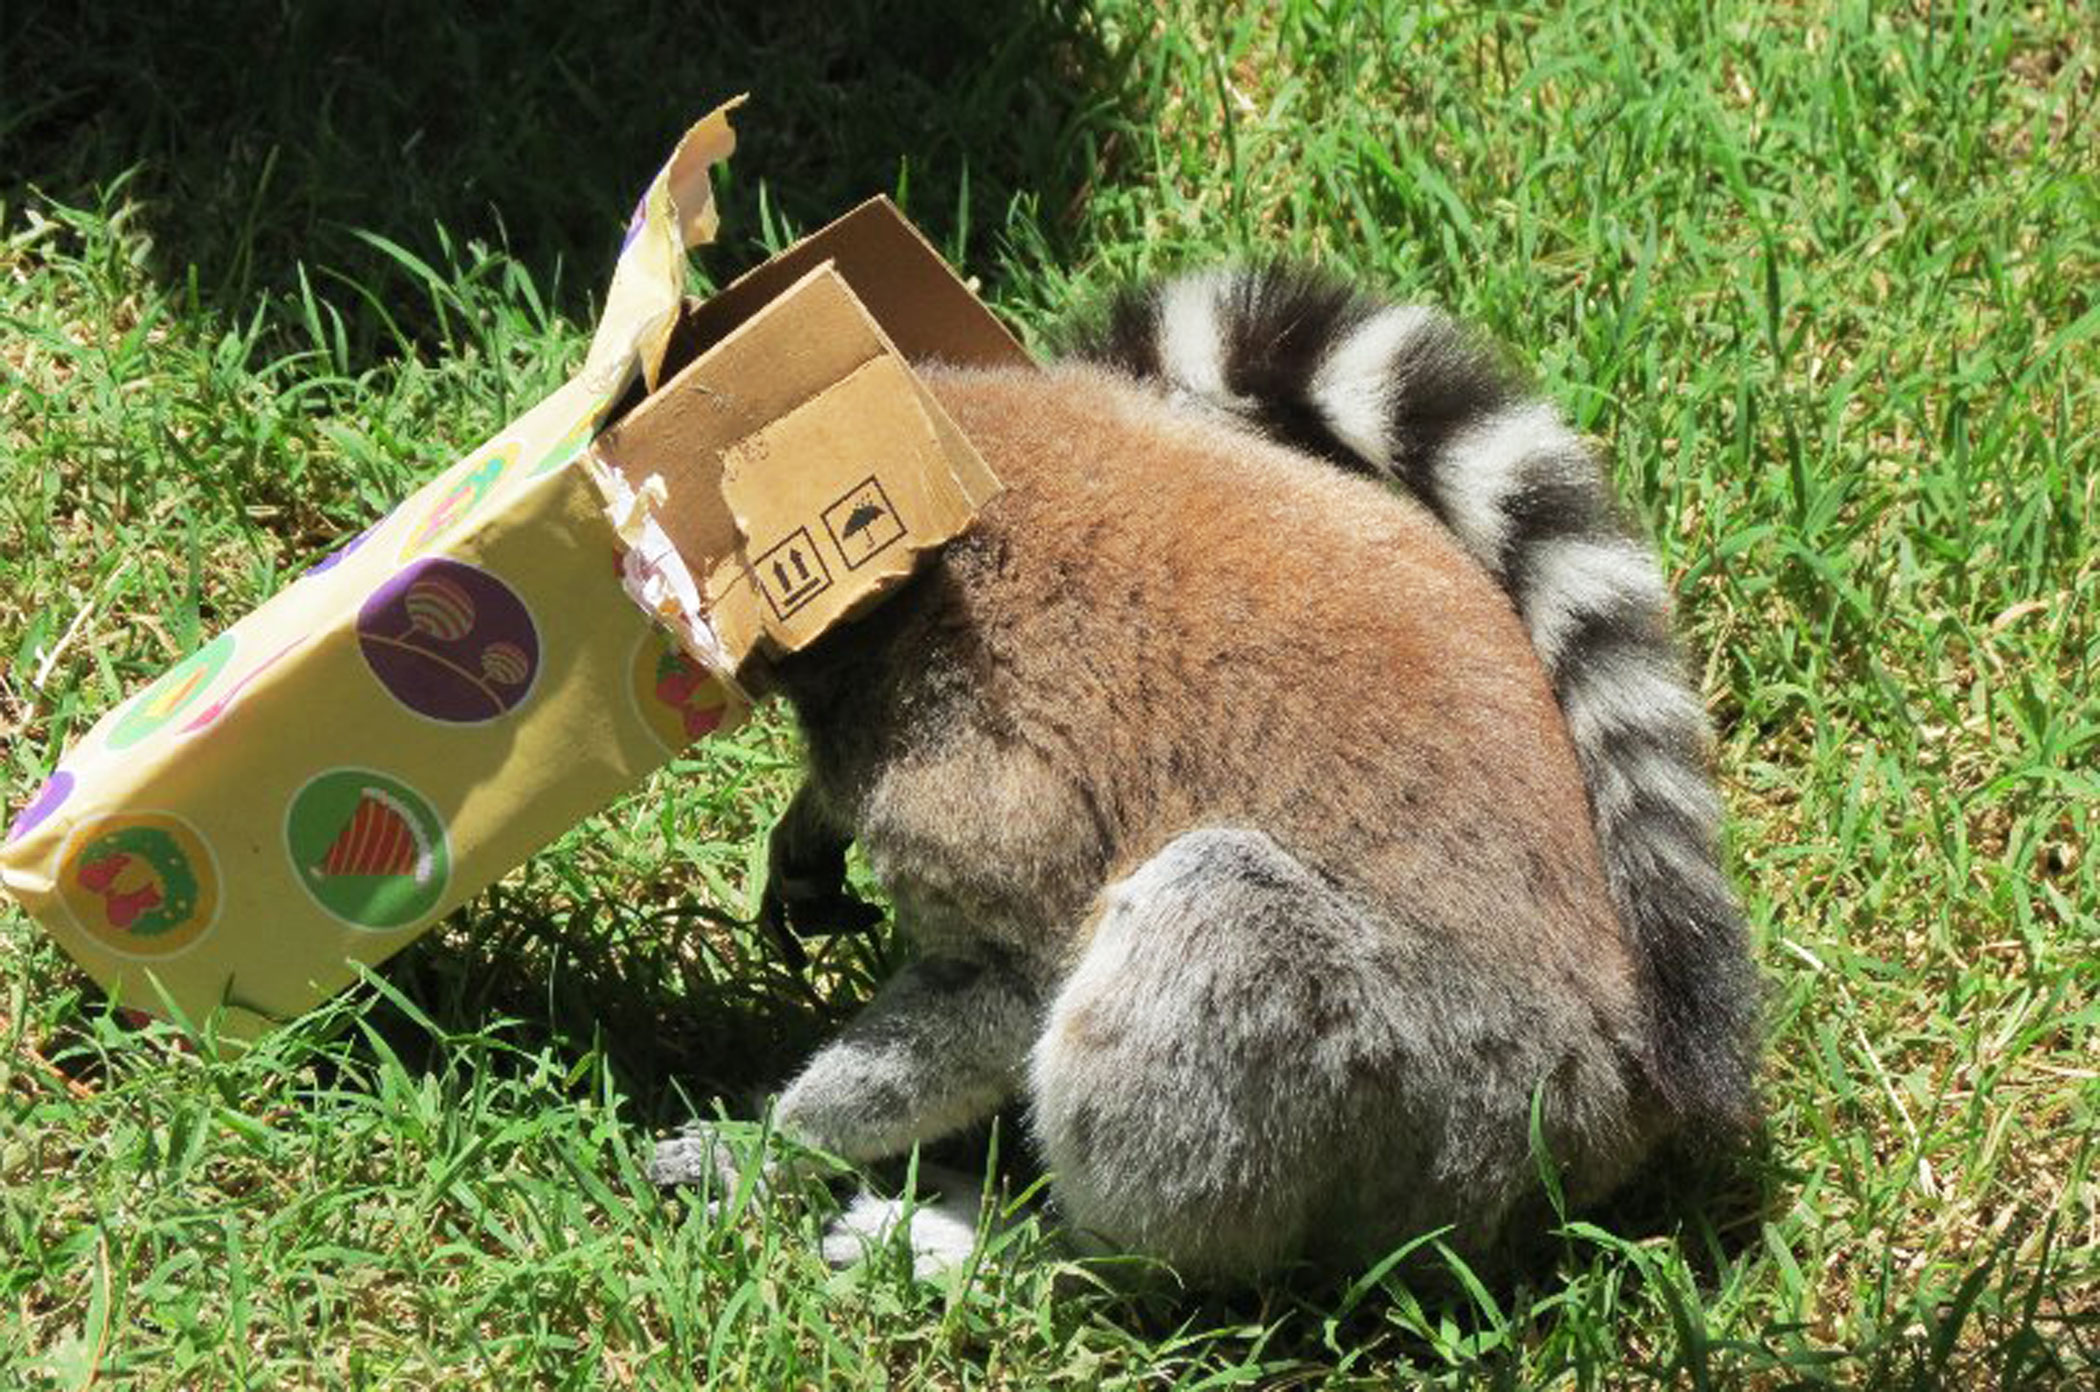 This image released by Buin Park Zoo shows a ring-tailed lemur searching for a Christmas gift at the Buin Park Zoo on Dec. 22, 2105, in the commune of Buin, Chile.